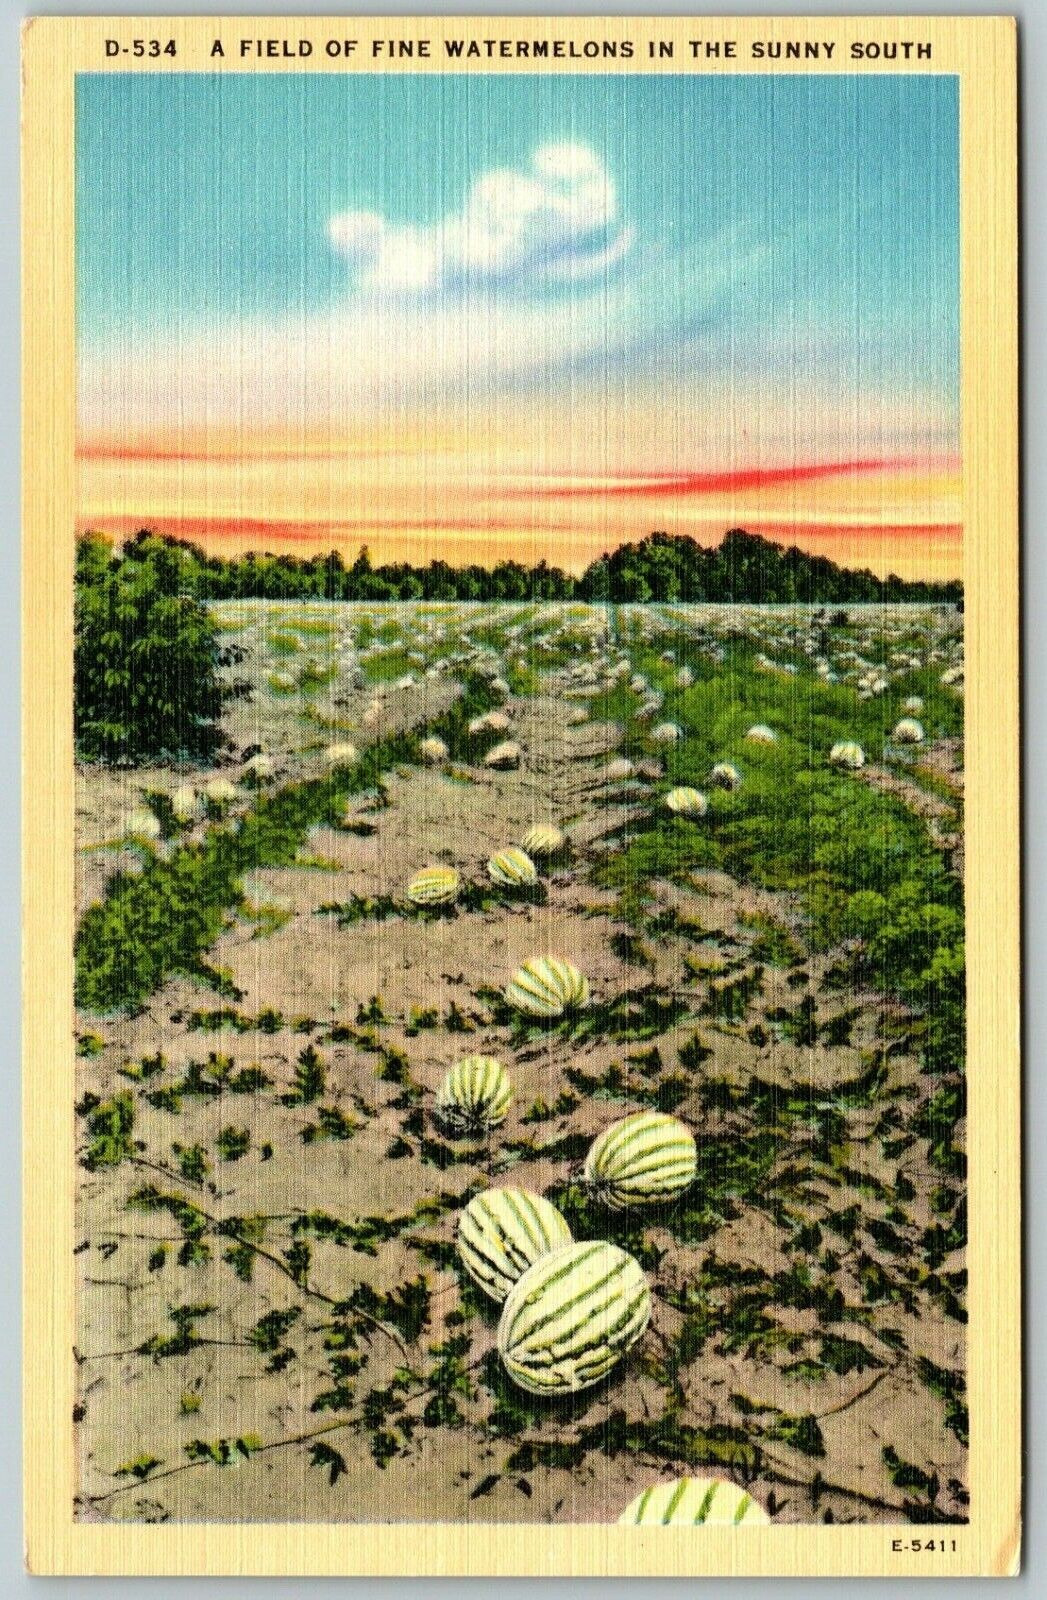 A Field of Fine Watermelons in the Sunny South - Postcard